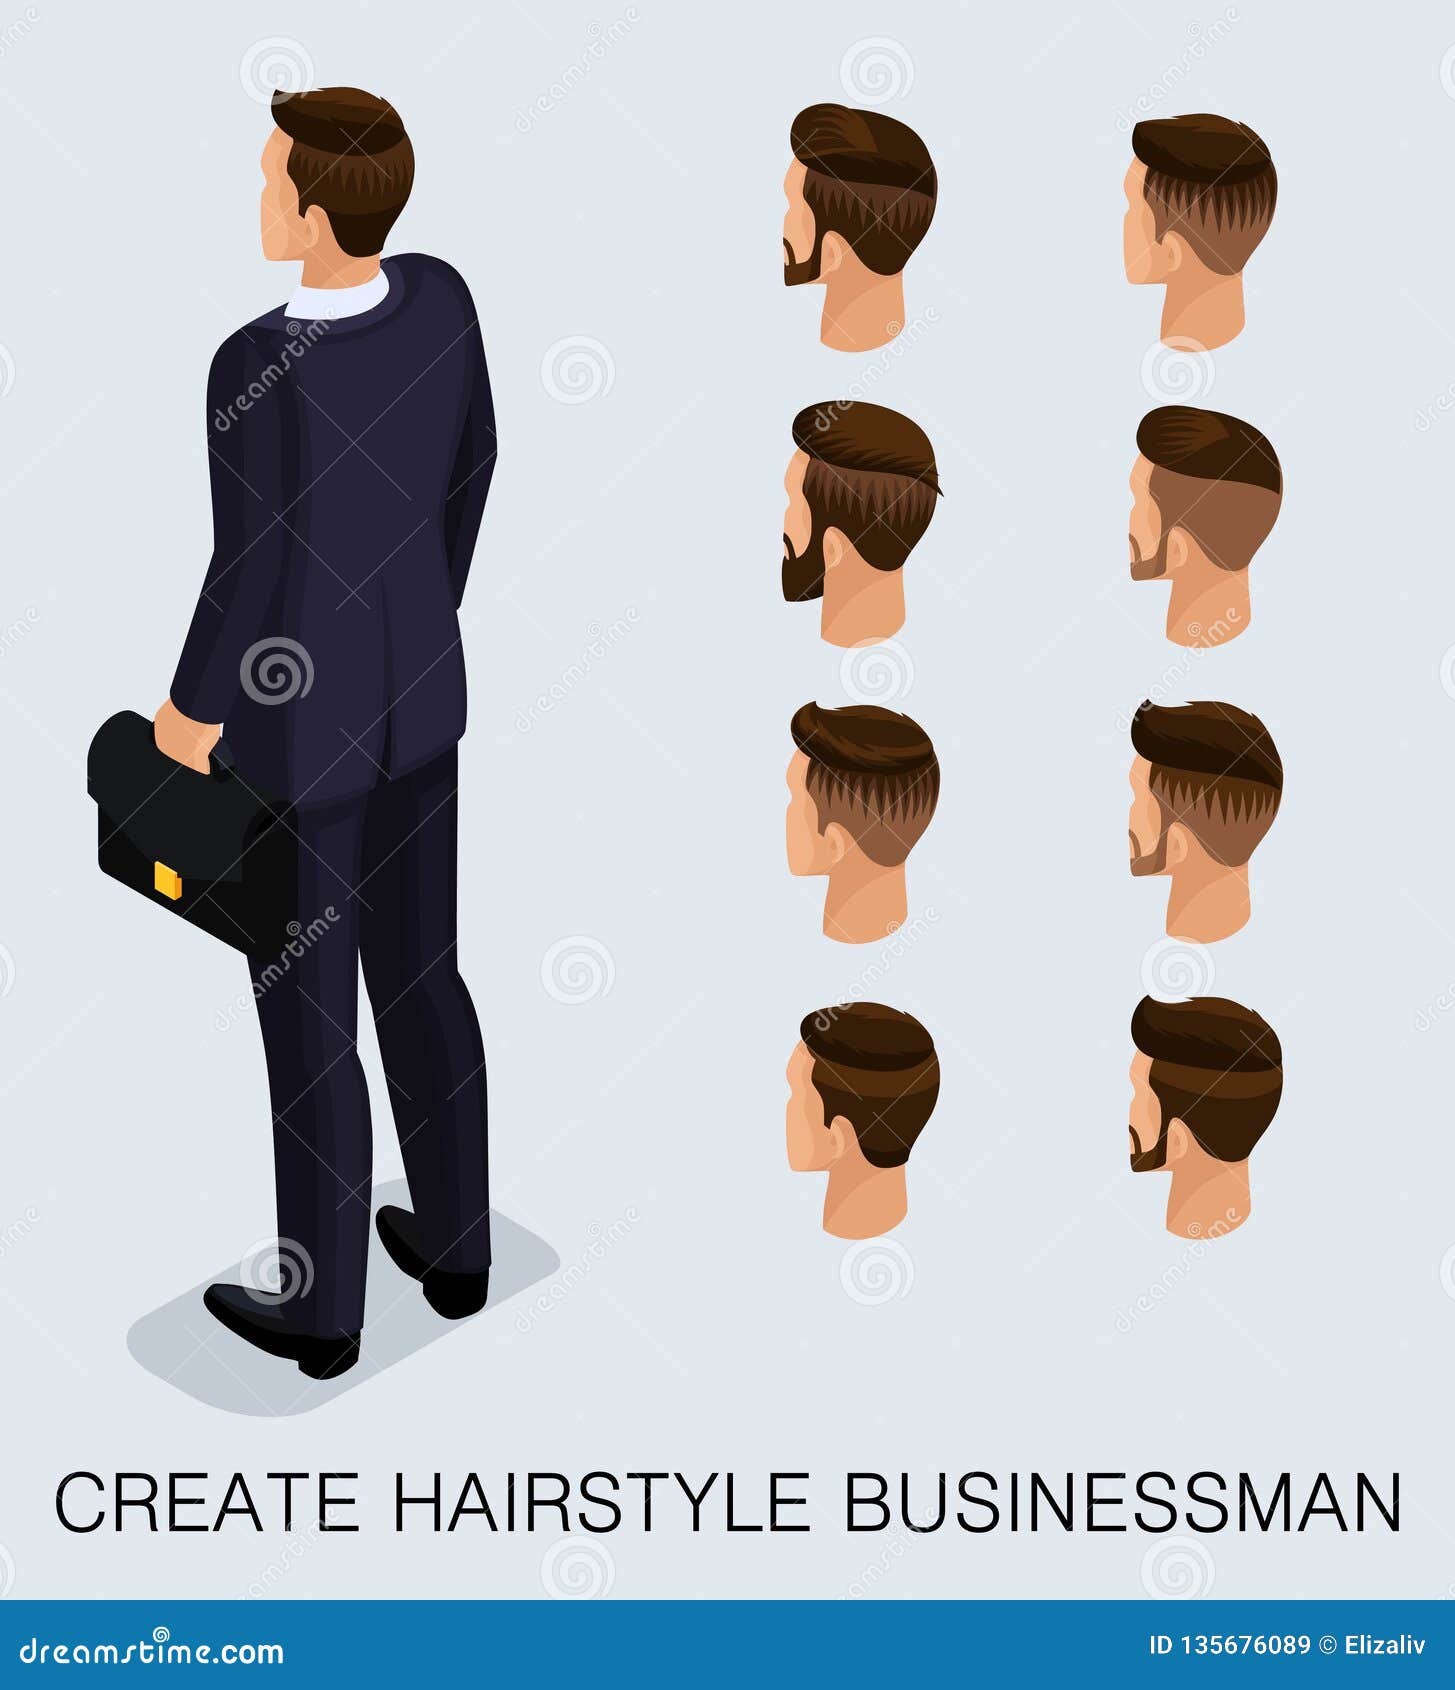 Back Fade Hairstyle - Mens Hairstyle 2020